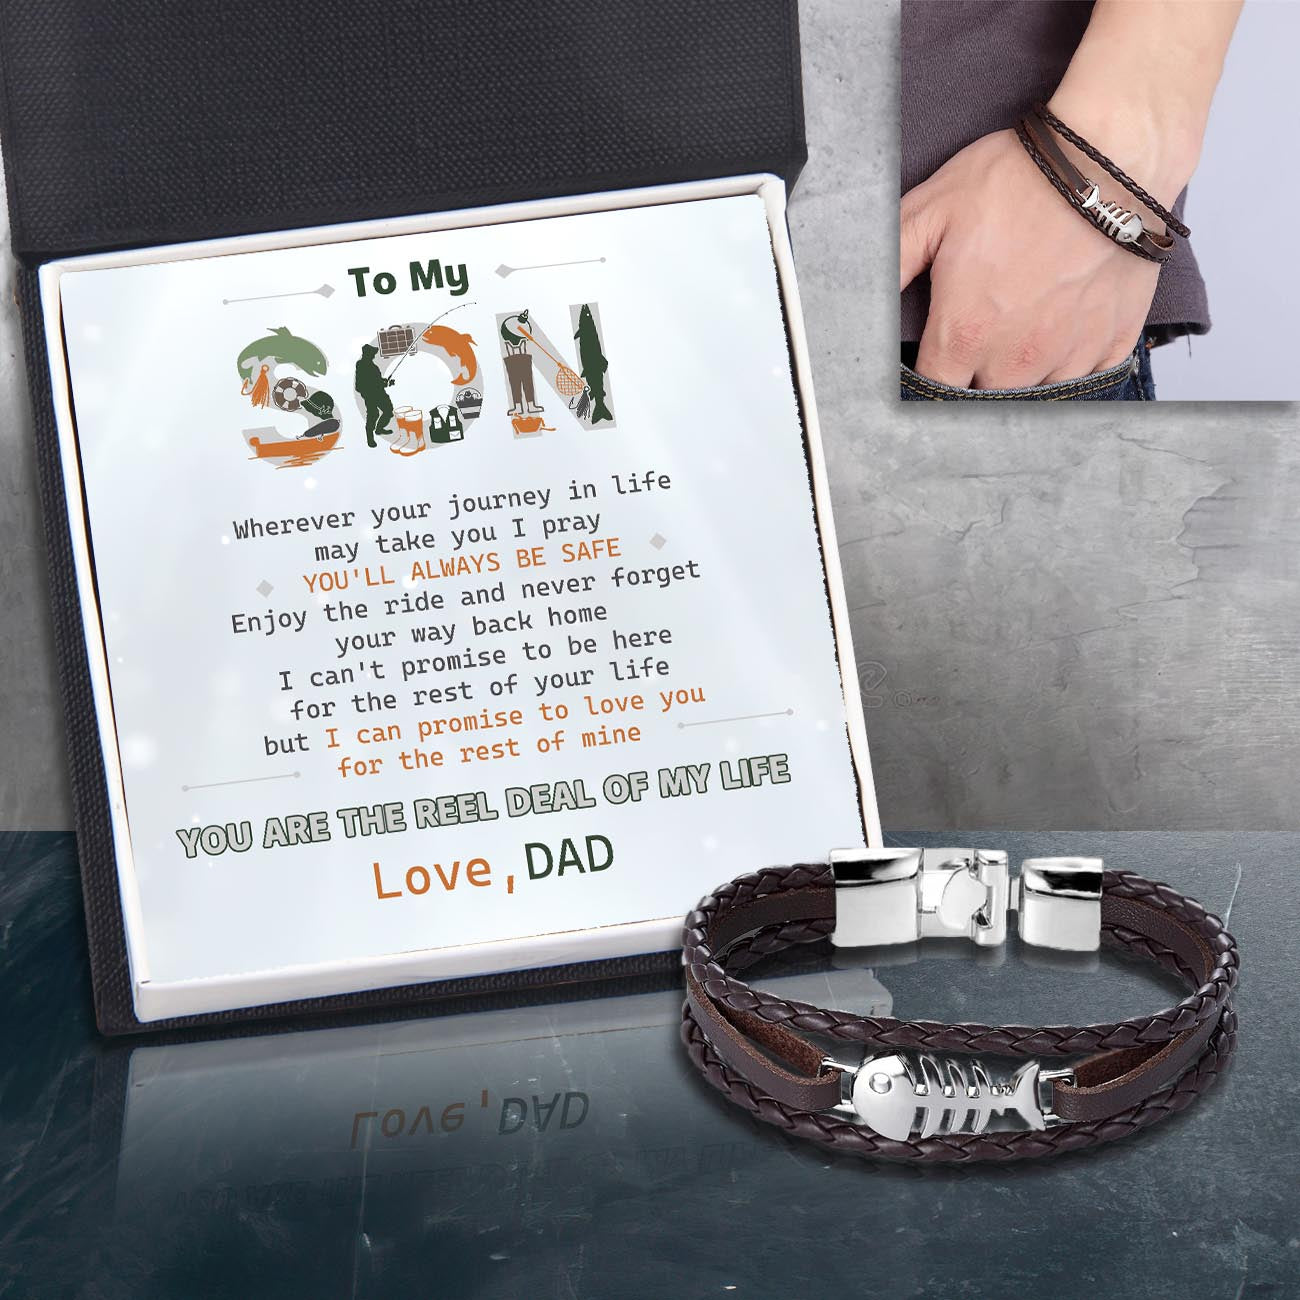 Fish Leather Bracelet - Fishing - To My Son - You Are The Reel Deal Of My Life - Ukgbzp16002